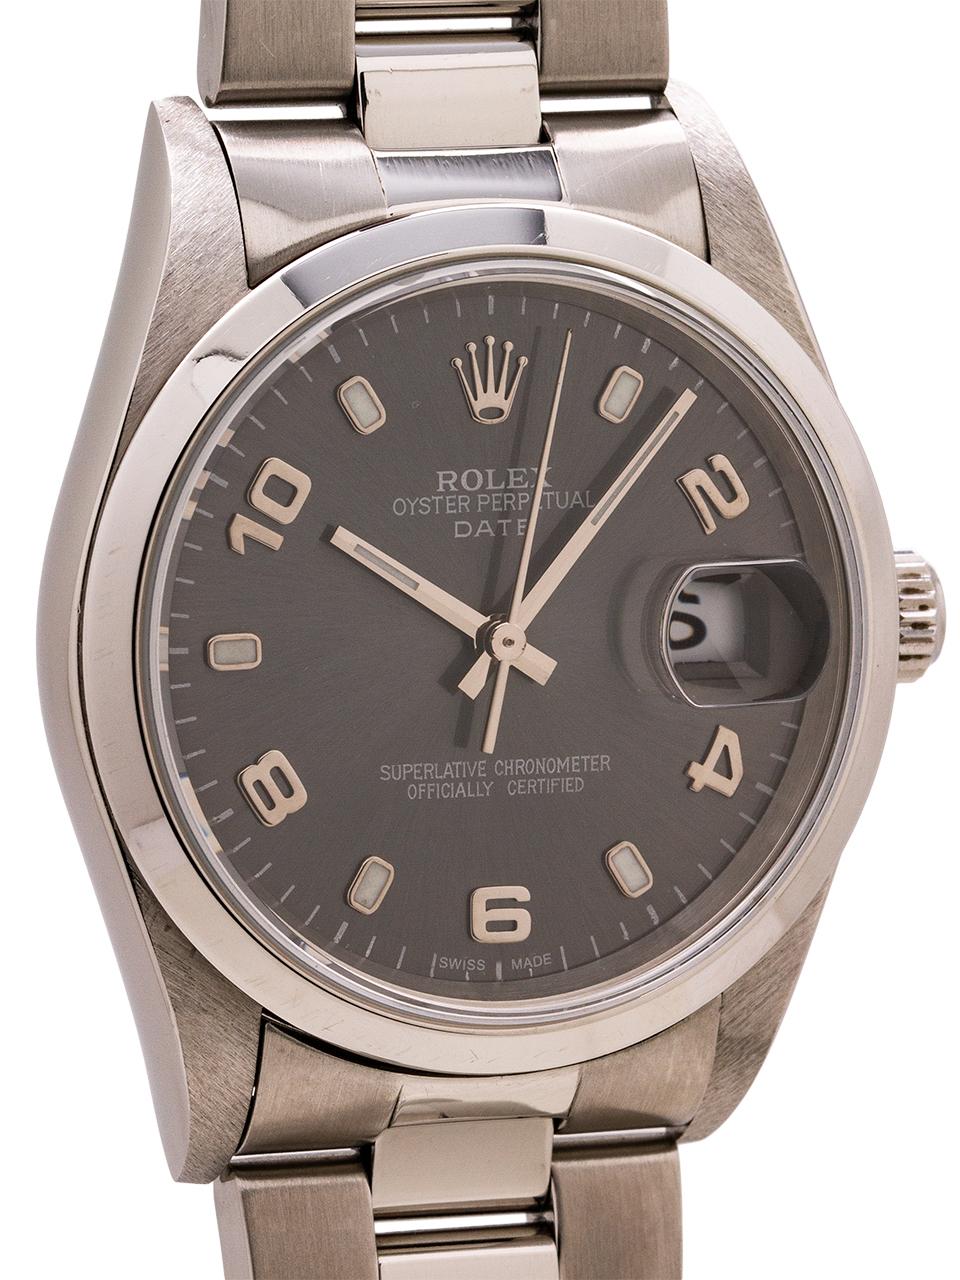 
Rolex Oyster Perpetual Date ref 15200 serial #Y5  circa 2002 with custom colored anthracite gray dial with raised arabic indexes and silver baton hands. Featuring a 34mm diameter case with smooth bezel and sapphire crystal. Very popular dial